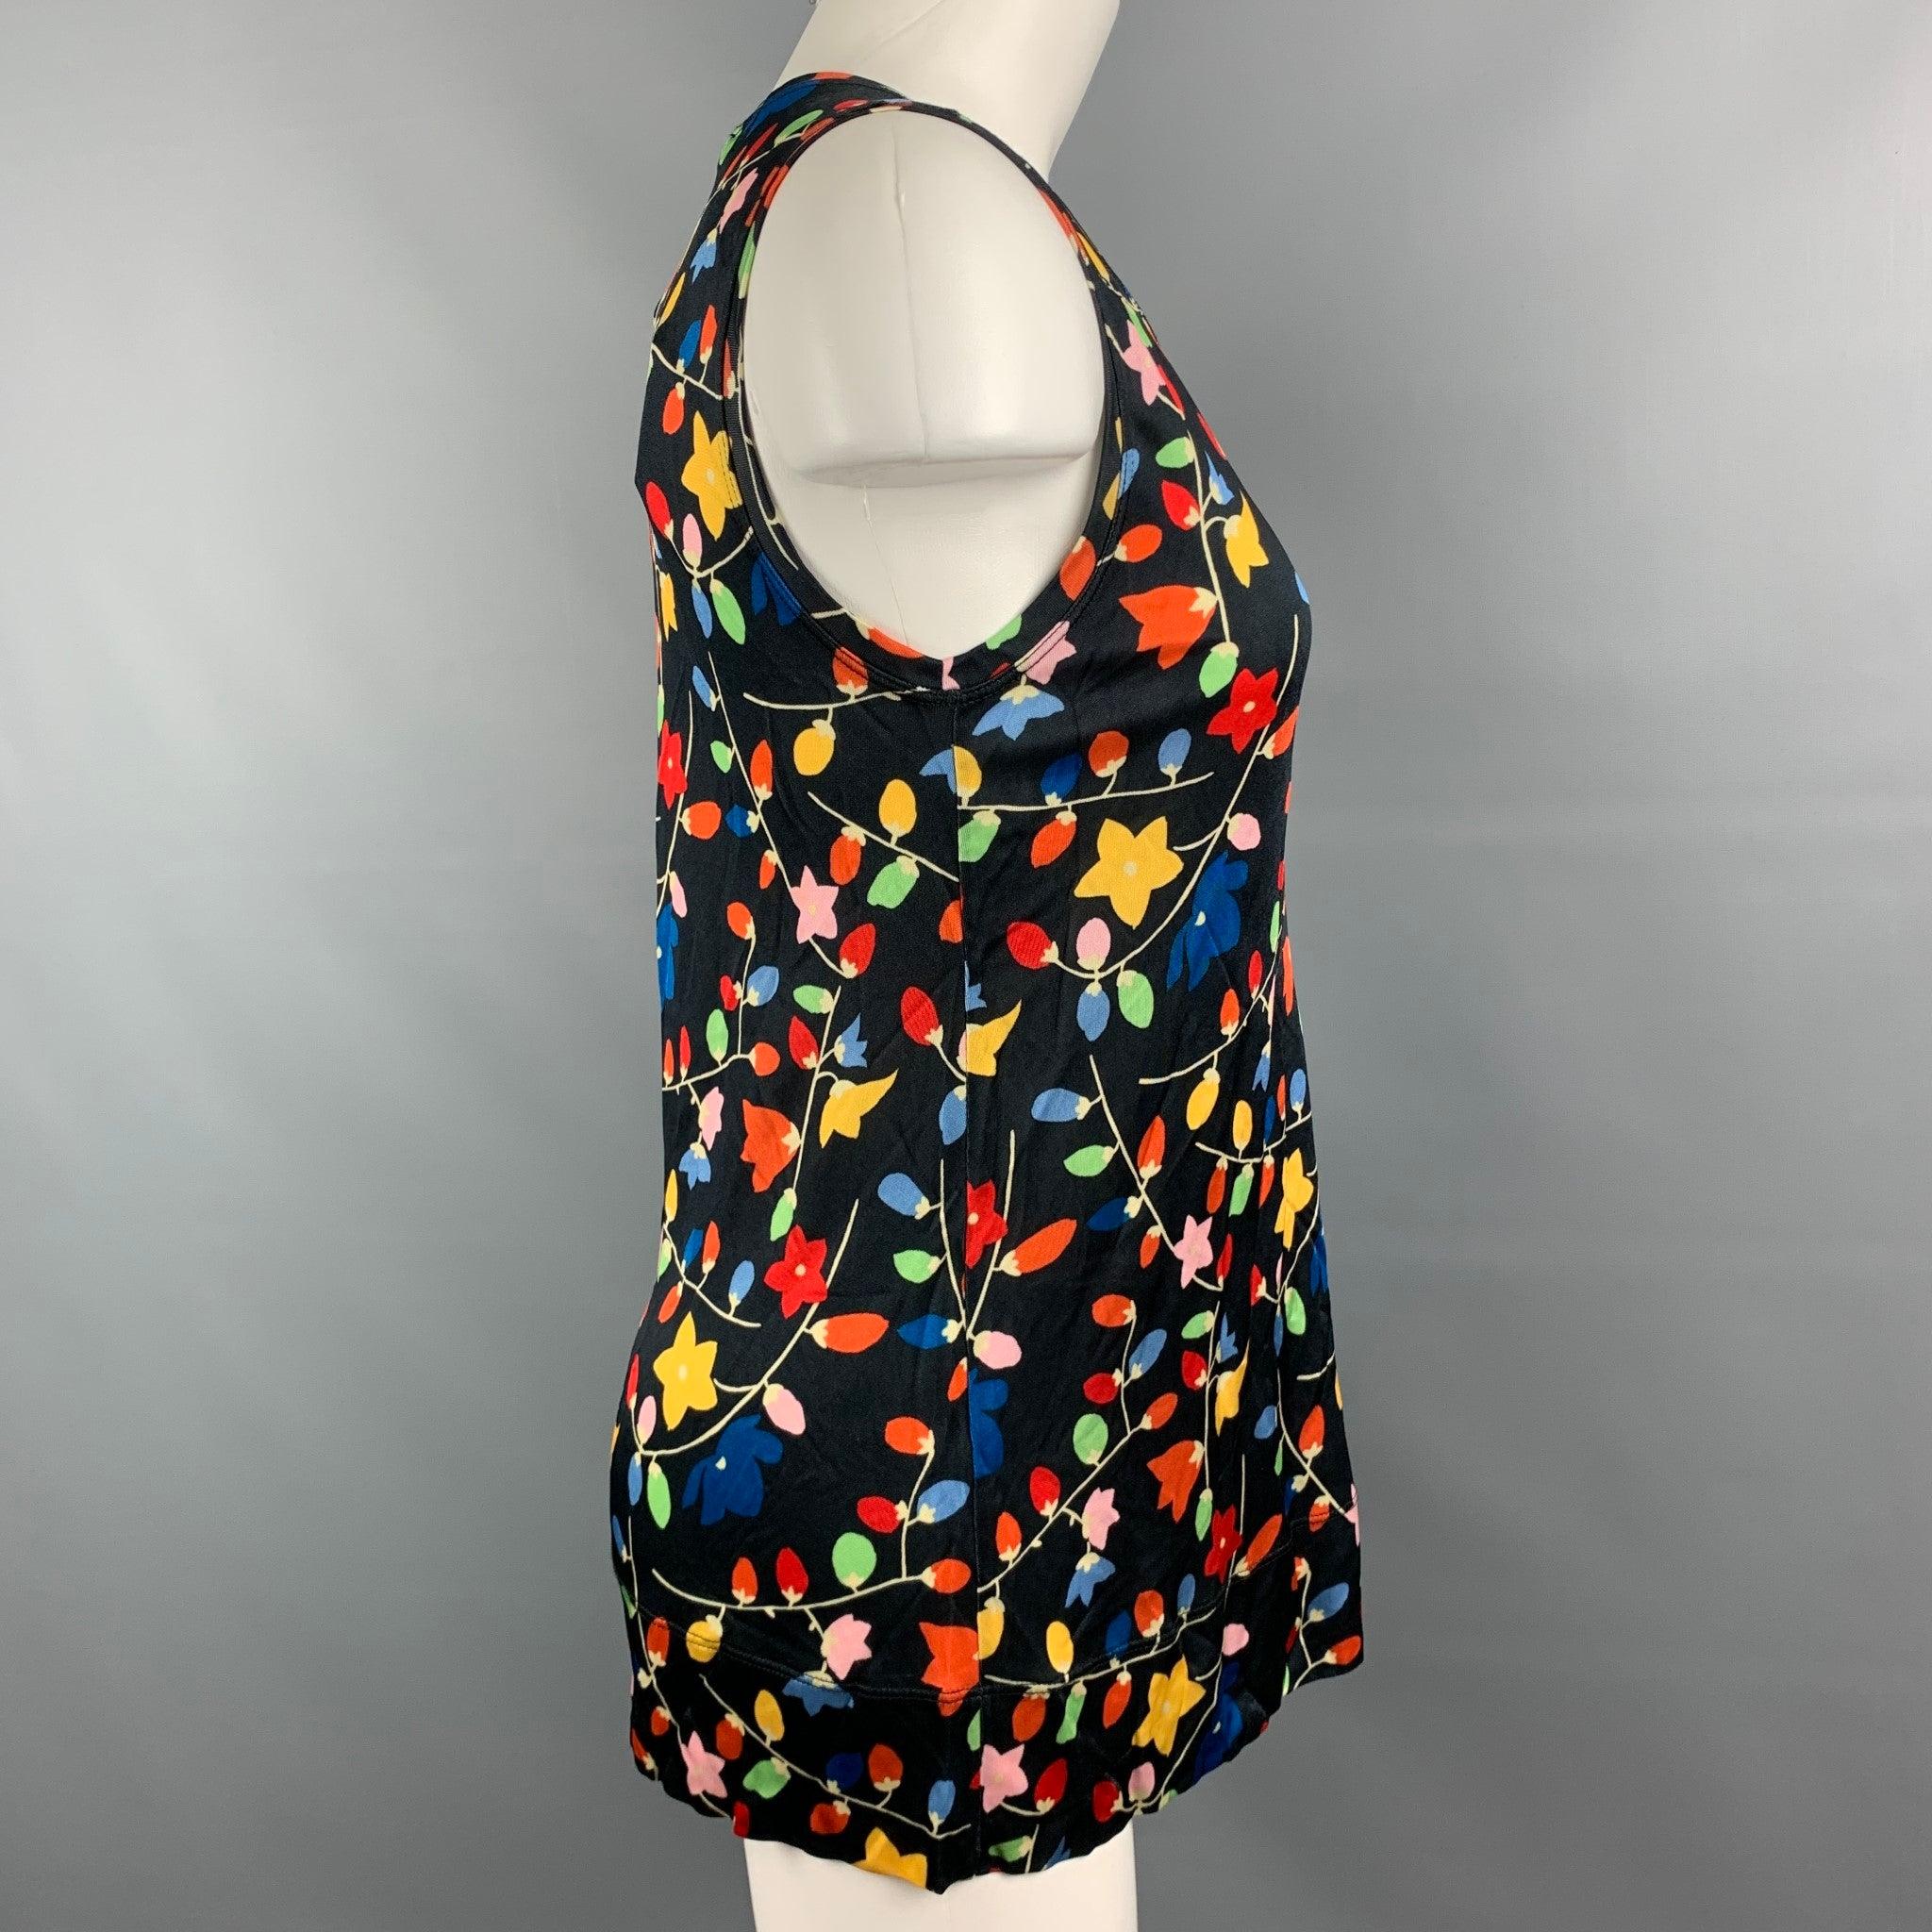 LOVE MOSCHINO blouse comes in a black viscose jersey material, with a multicolor floral print, a round neck, a black bow, sleeveless.New with Tags. 

Marked:   D 36 / GB 8 / F 36 / USA 4 / I 40 

Measurements: 
 
Shoulder: 14.5 inches  Bust:
32